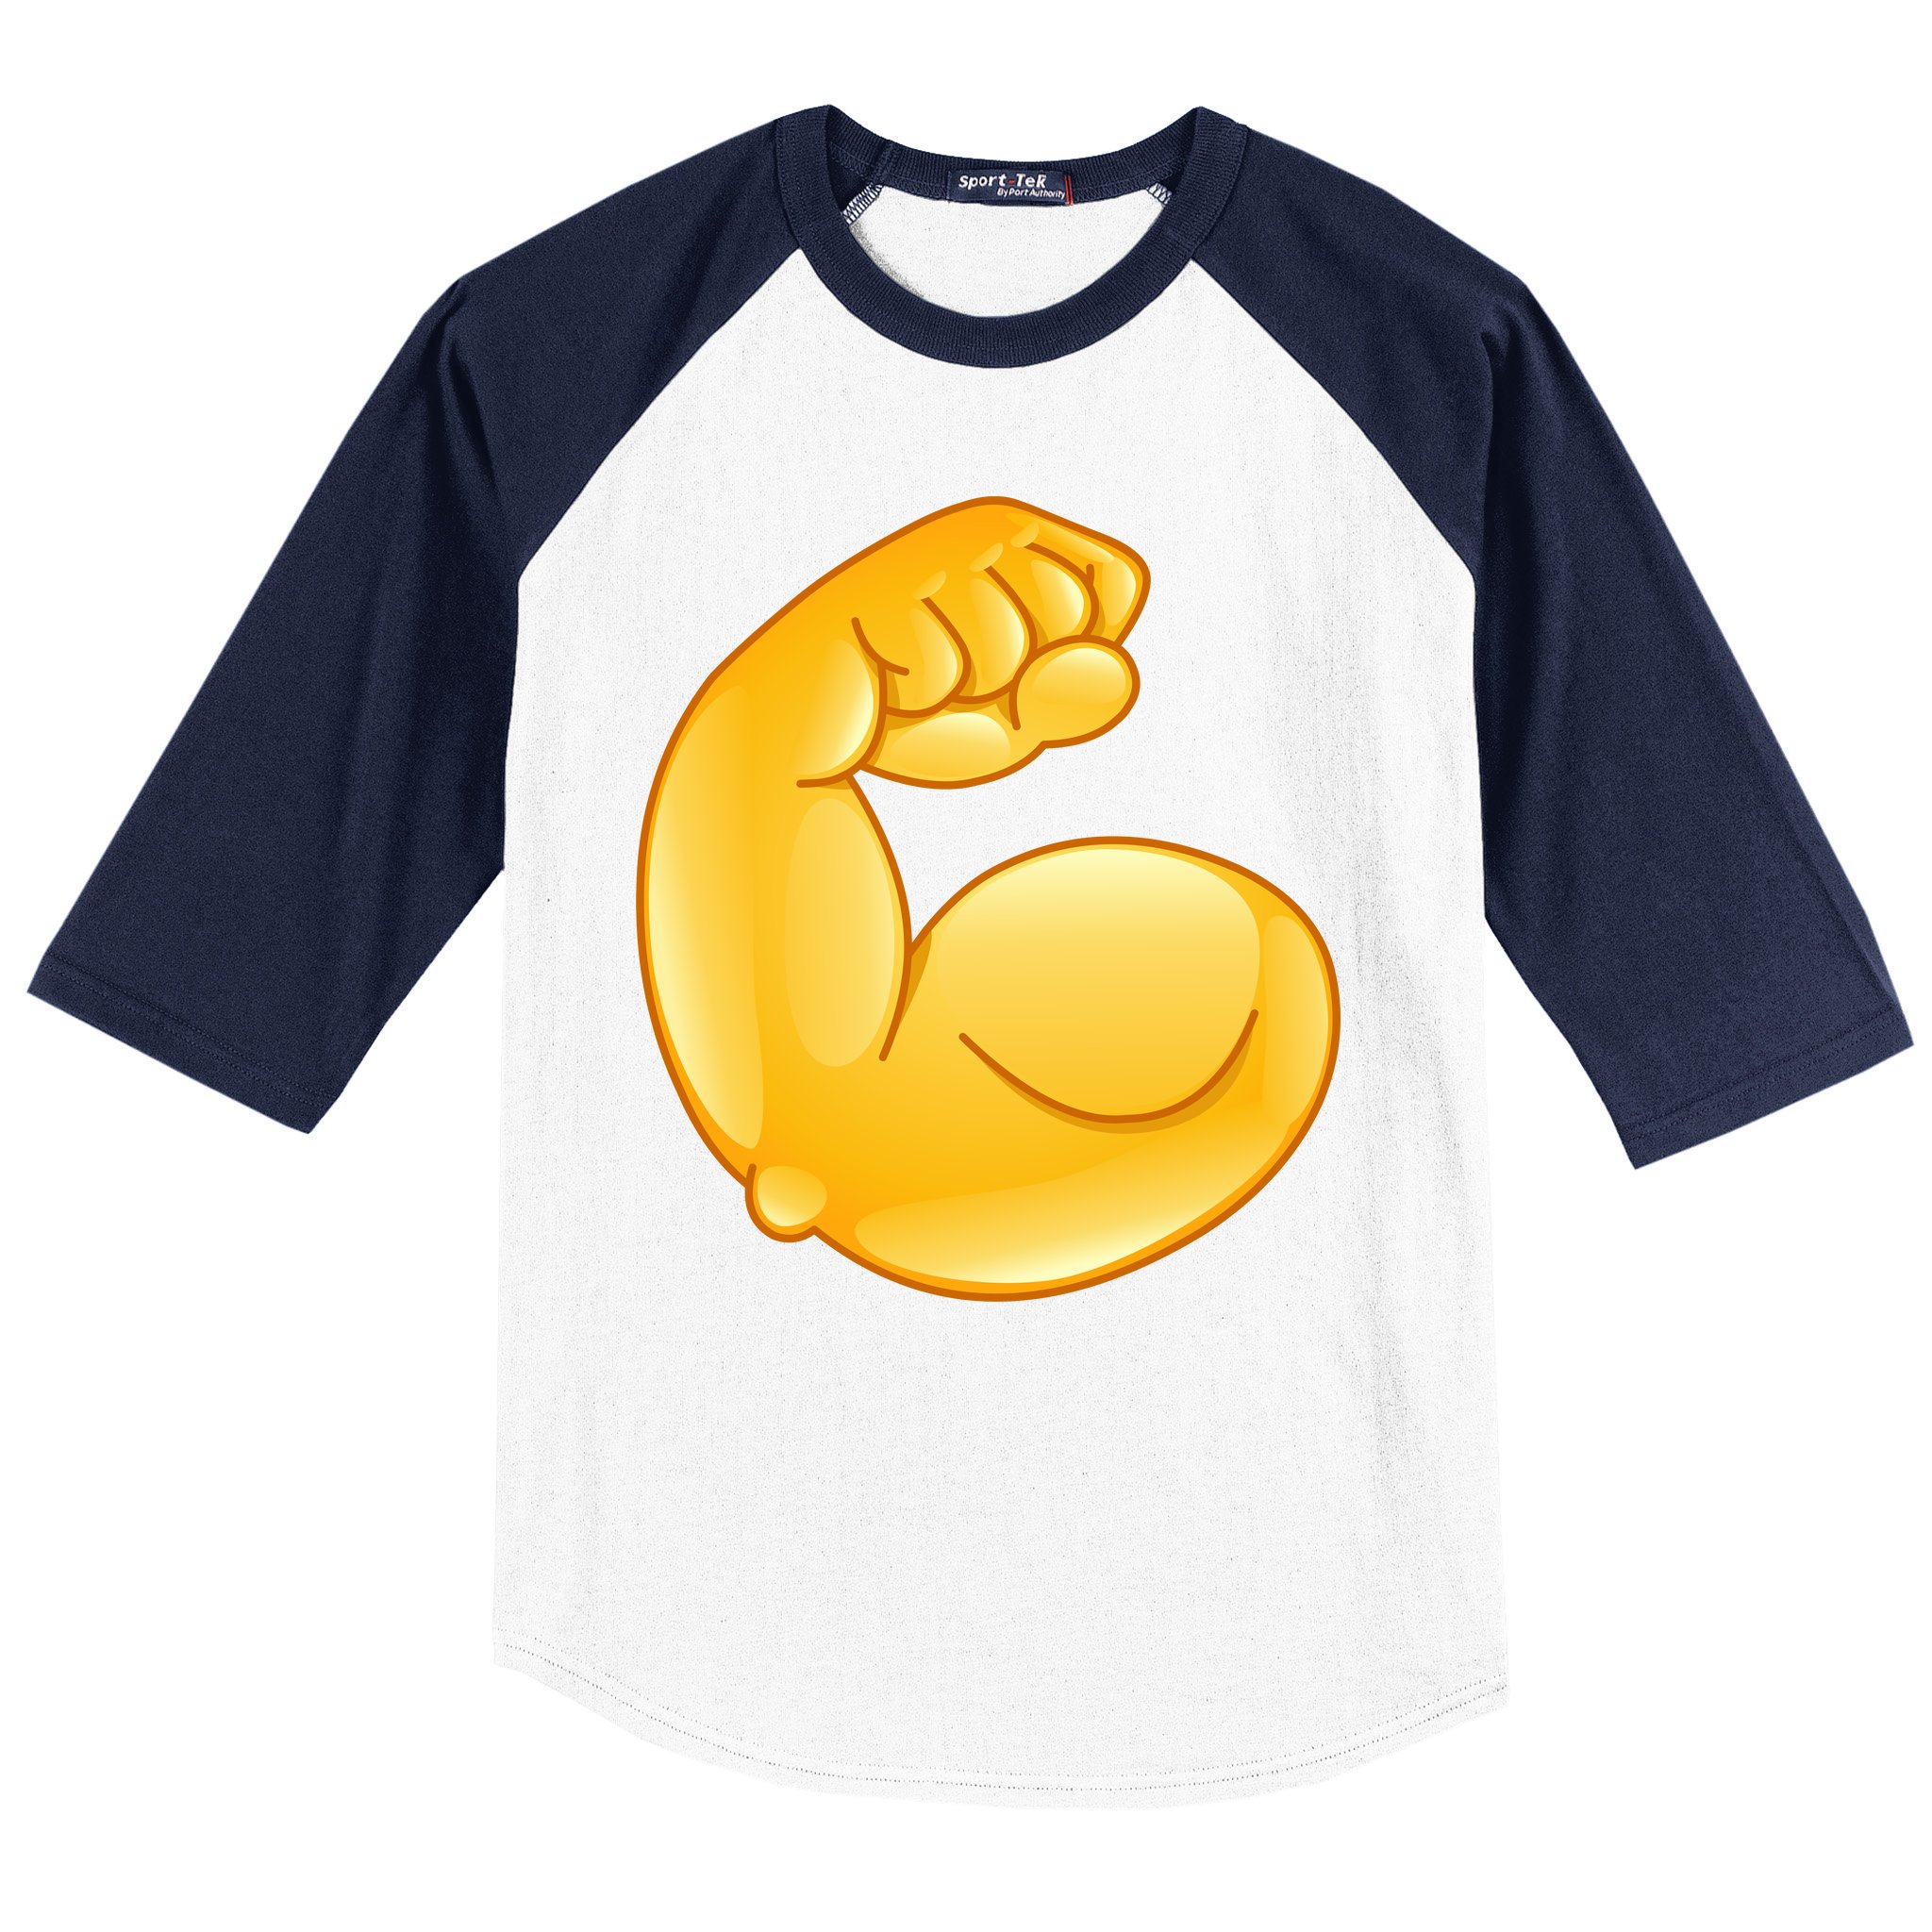 https://images3.teeshirtpalace.com/images/productImages/muscle-strong-arm-flex-emoji--navy-rbs-garment.jpg